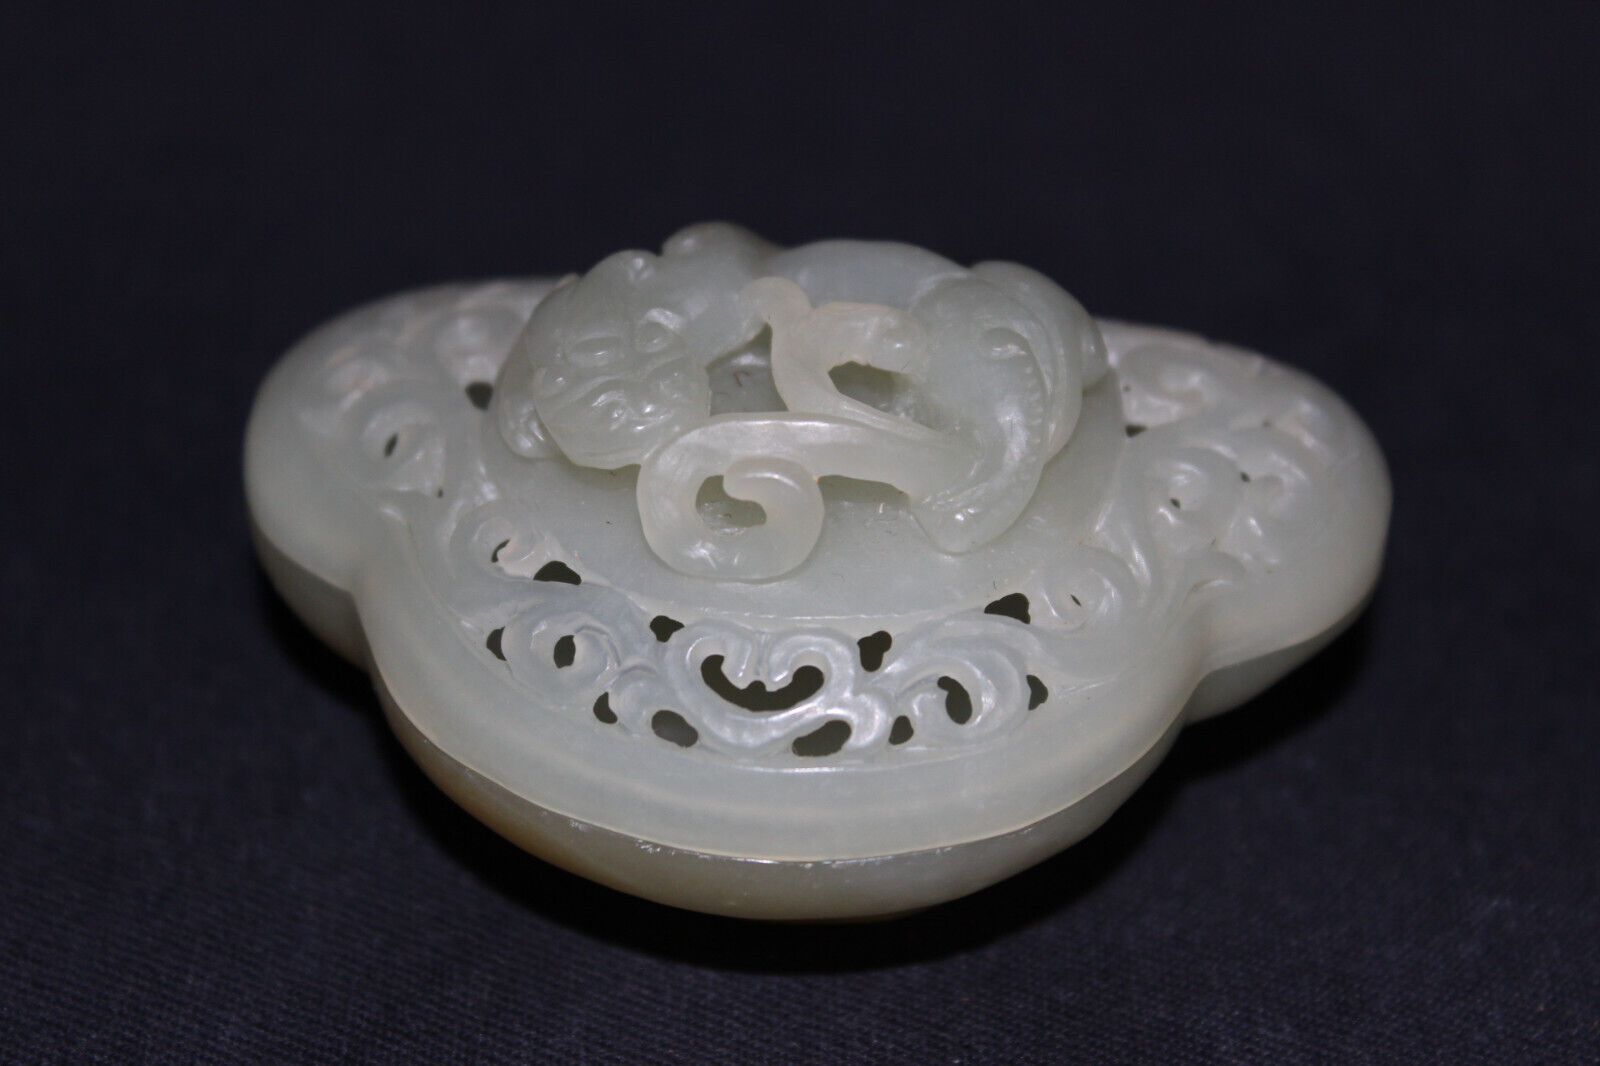 Jade Potpourri Container CH\'IH Dragon on Lid, 19th Century Chinese, Qing Dynasty